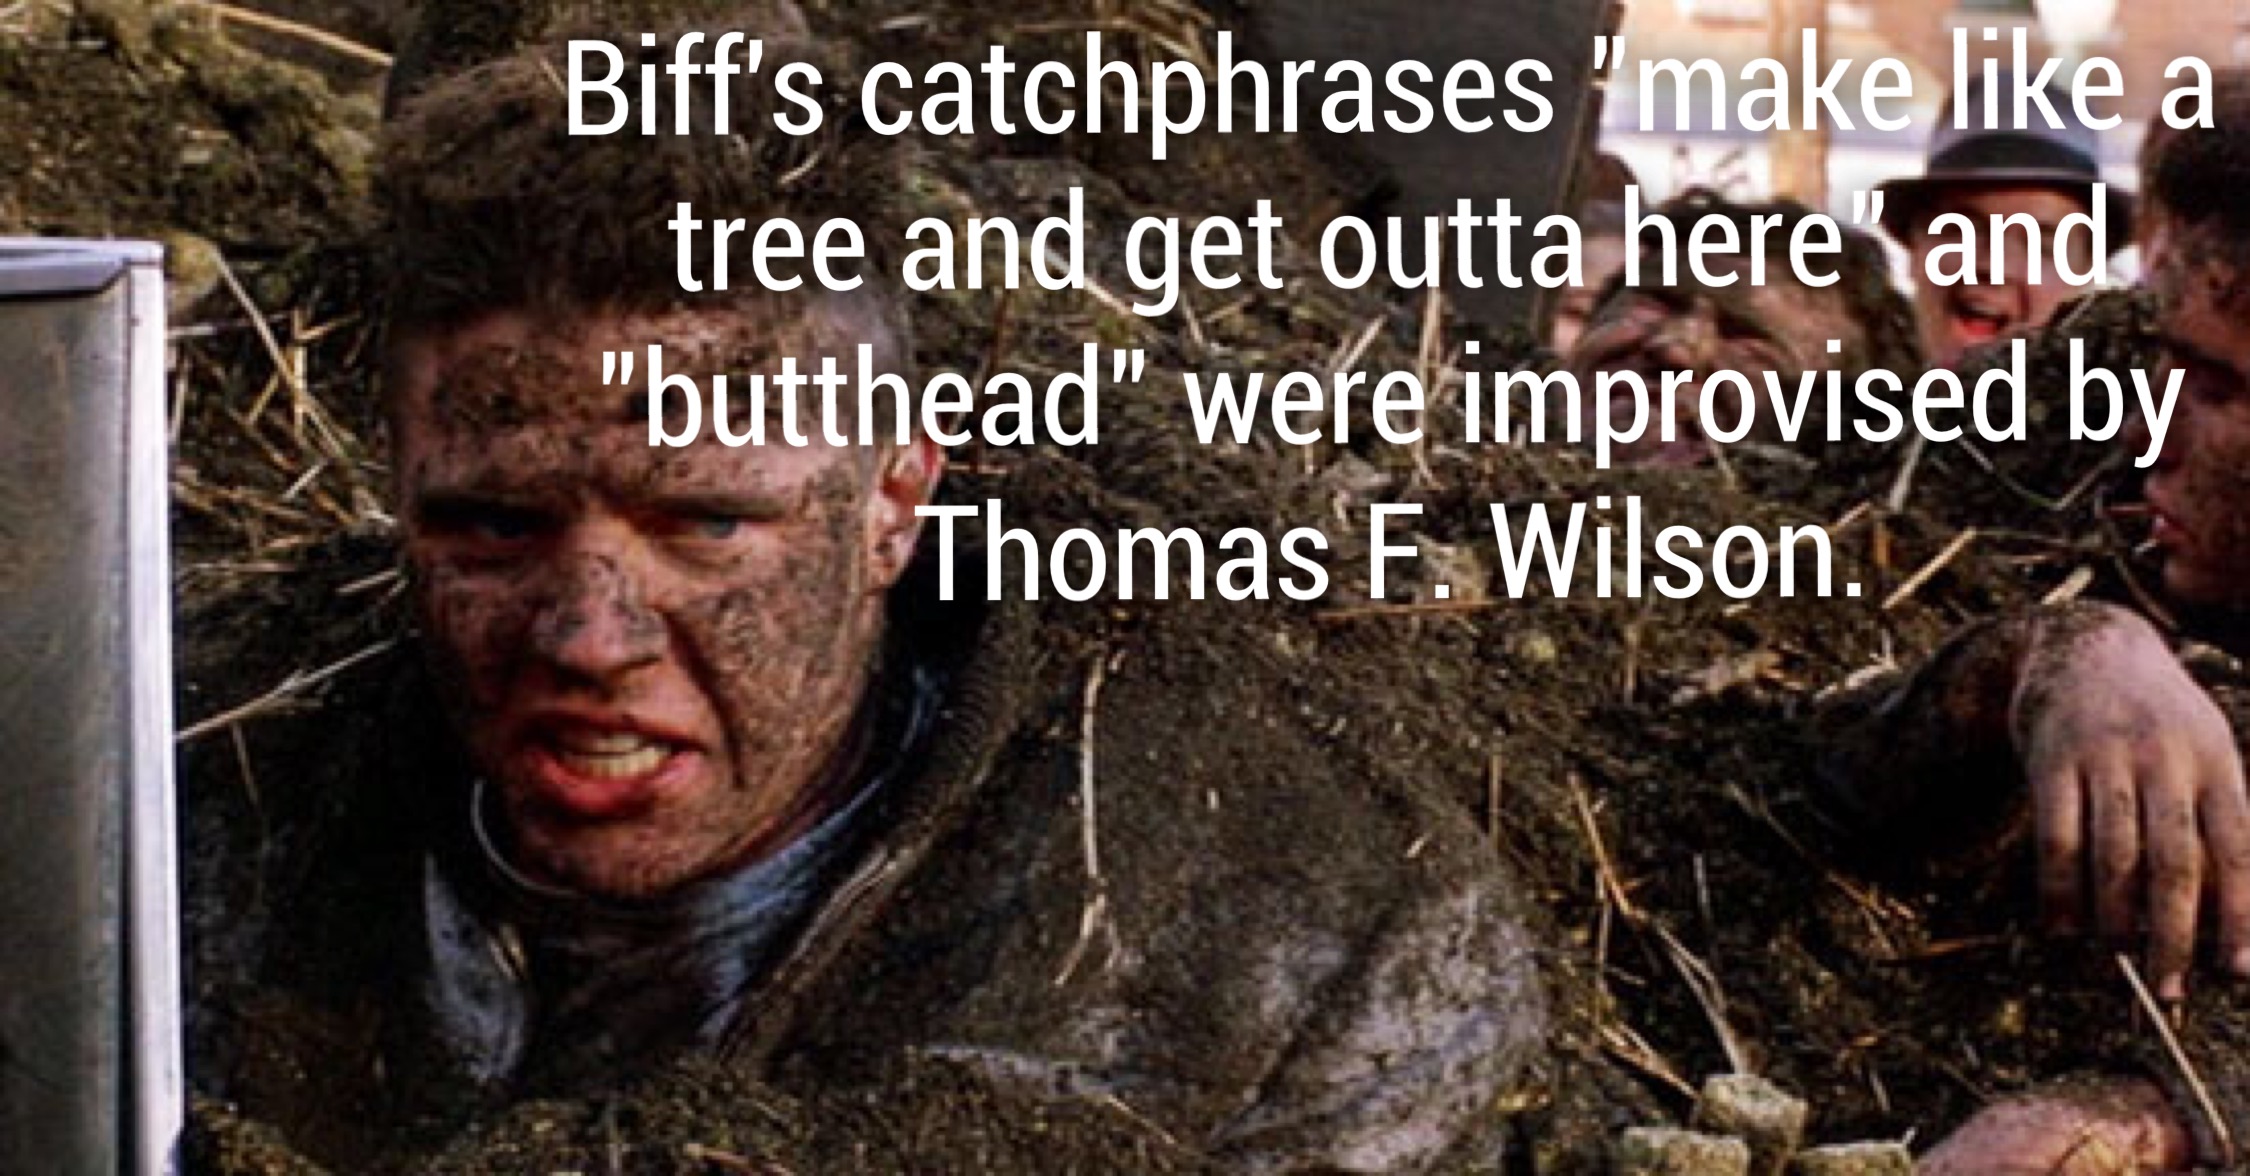 back to the future biff - Biff's catchphrases 'make a tree and get outta herehand. "butthead" were improvised by Thomas F. Wilson.